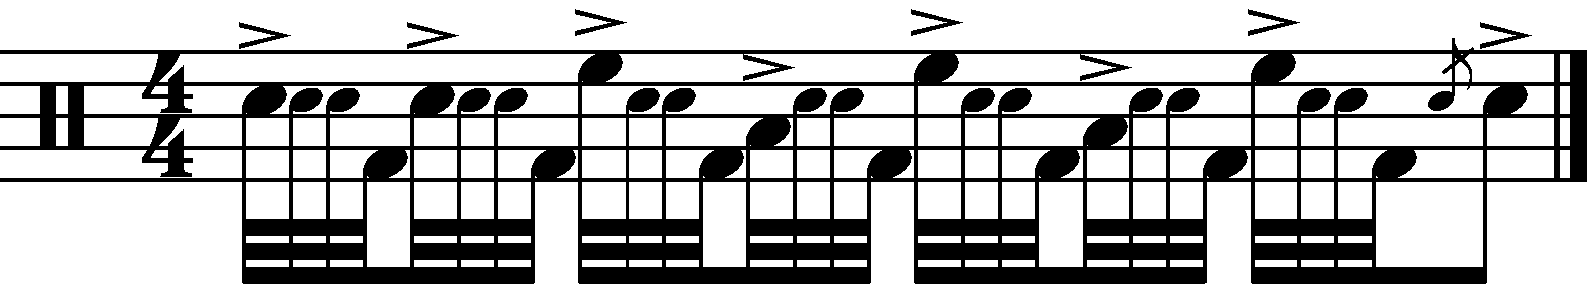 A fill based on the R L L F pattern played as 32nd notes